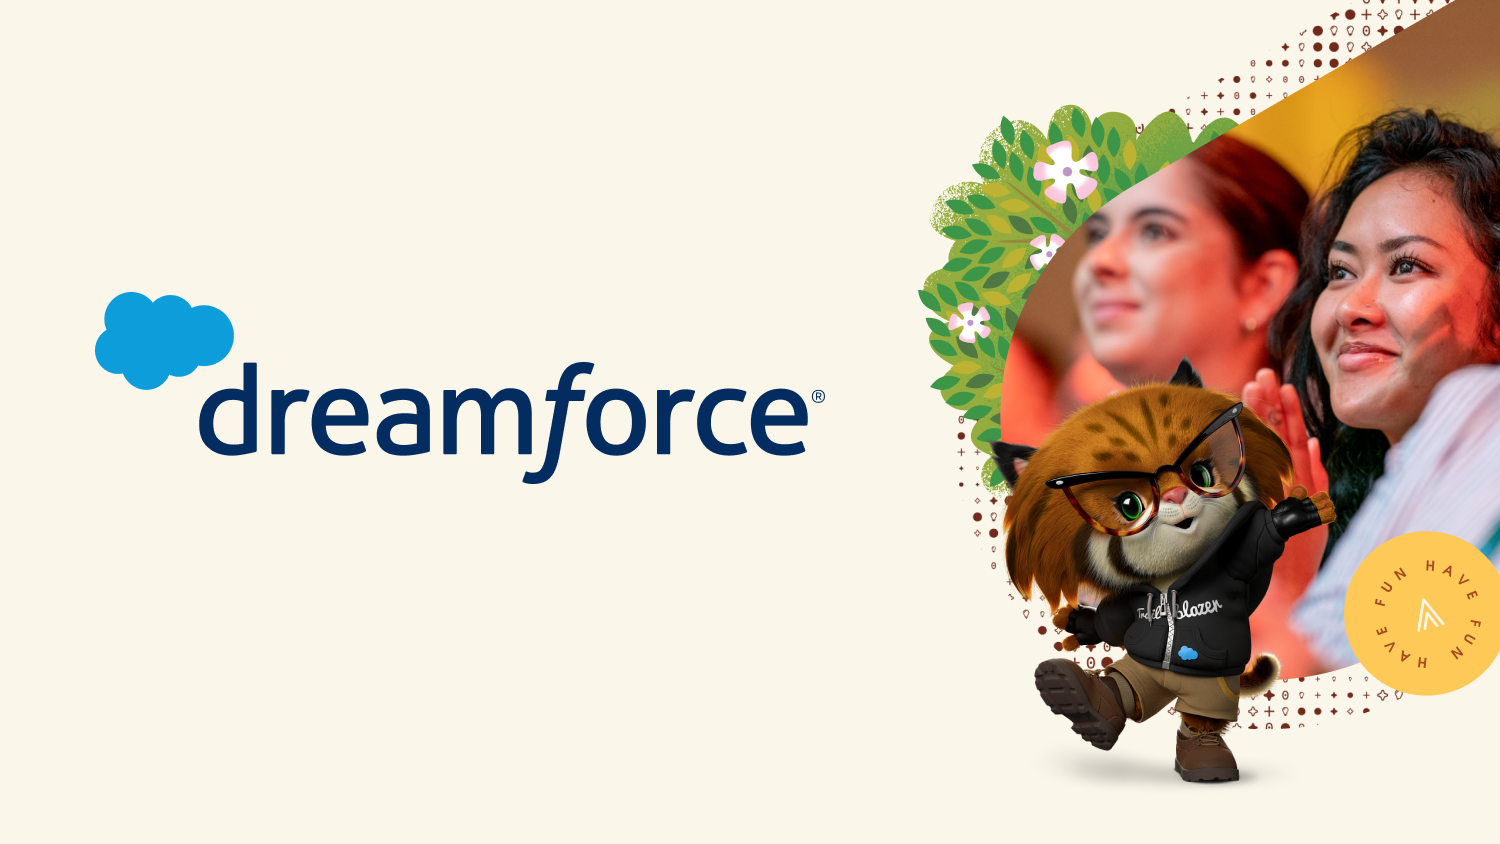 An illustration of a smiling woman, AppExchange mascot Appy, and the Dreamforce logo.